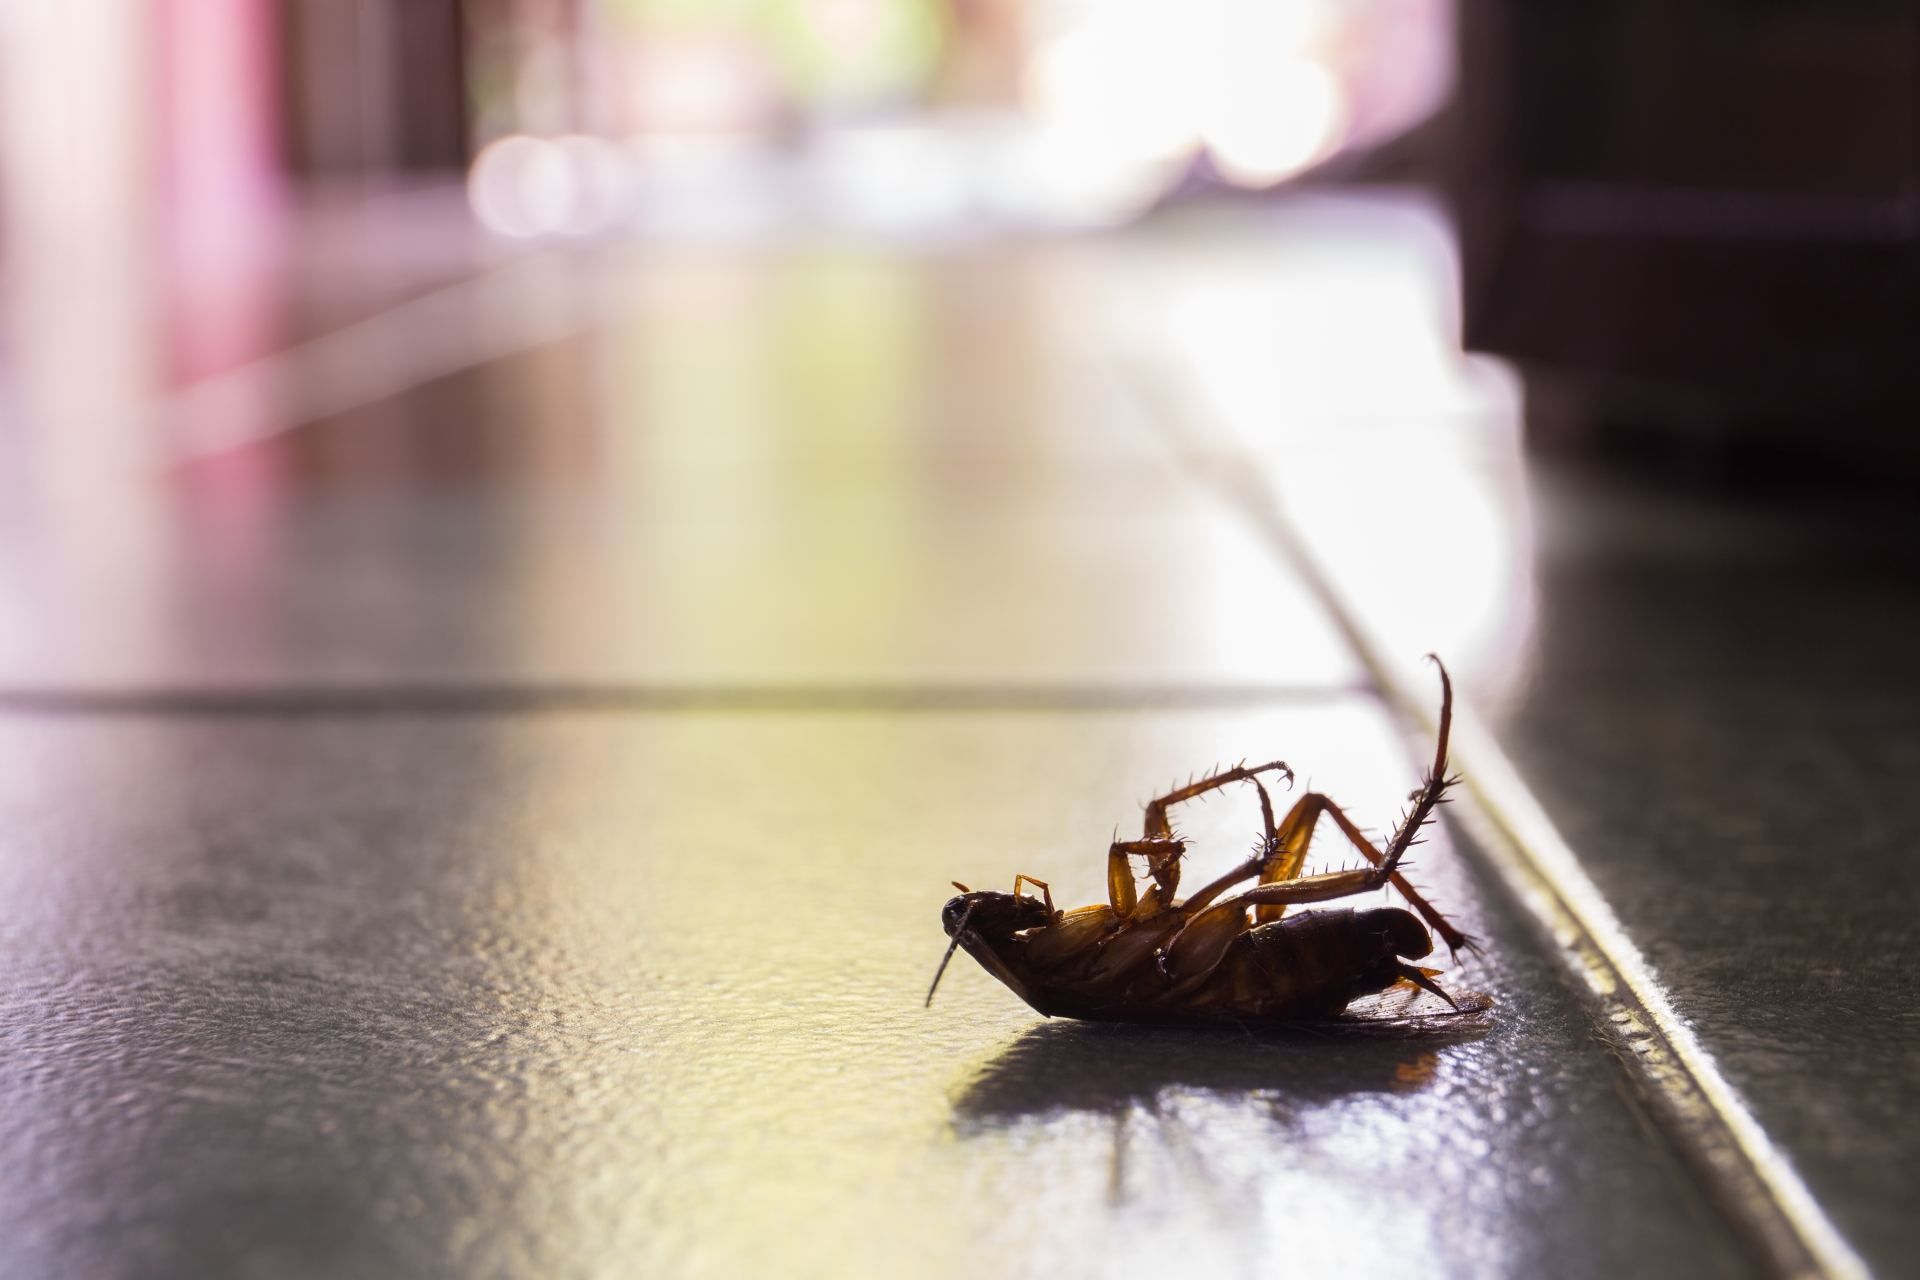 Cockroach Control, Pest Control in West Brompton, World's End, SW10. Call Now 020 8166 9746